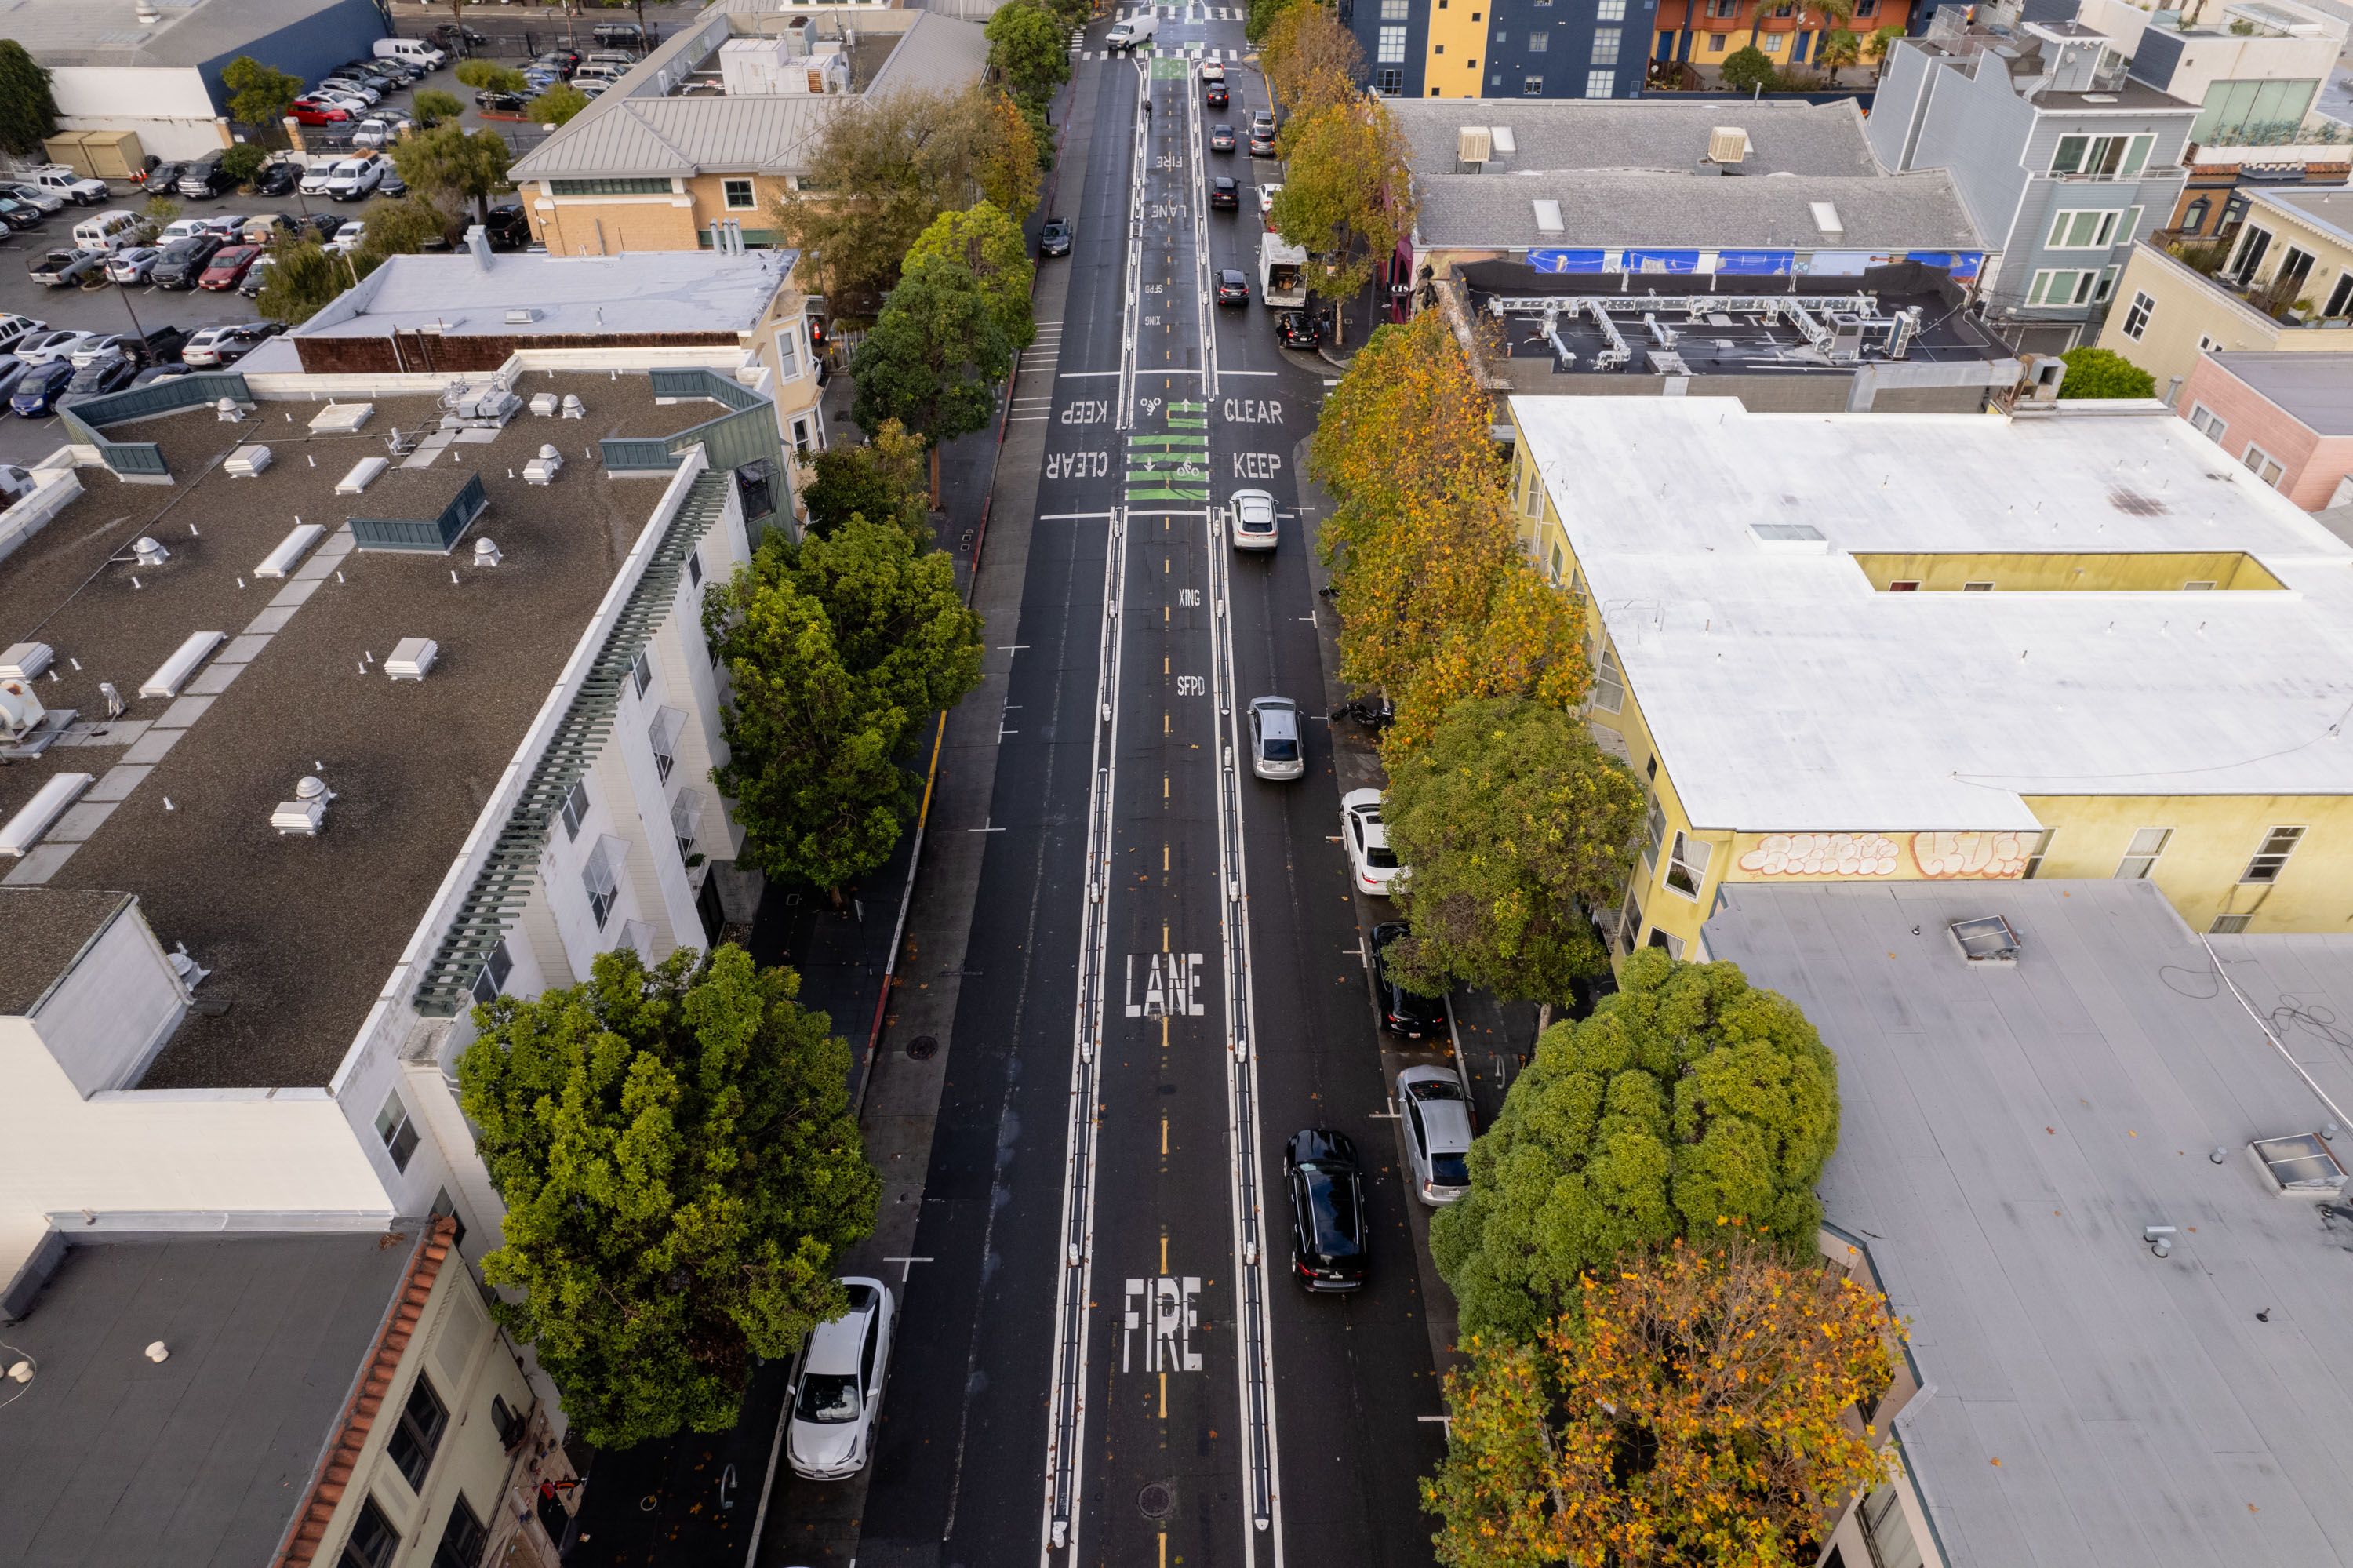 An aerial view of a two-lane road lined with trees and parked cars, flanked by buildings on both sides, with road markings indicating "LANE FIRE," and "KEEP CLEAR."